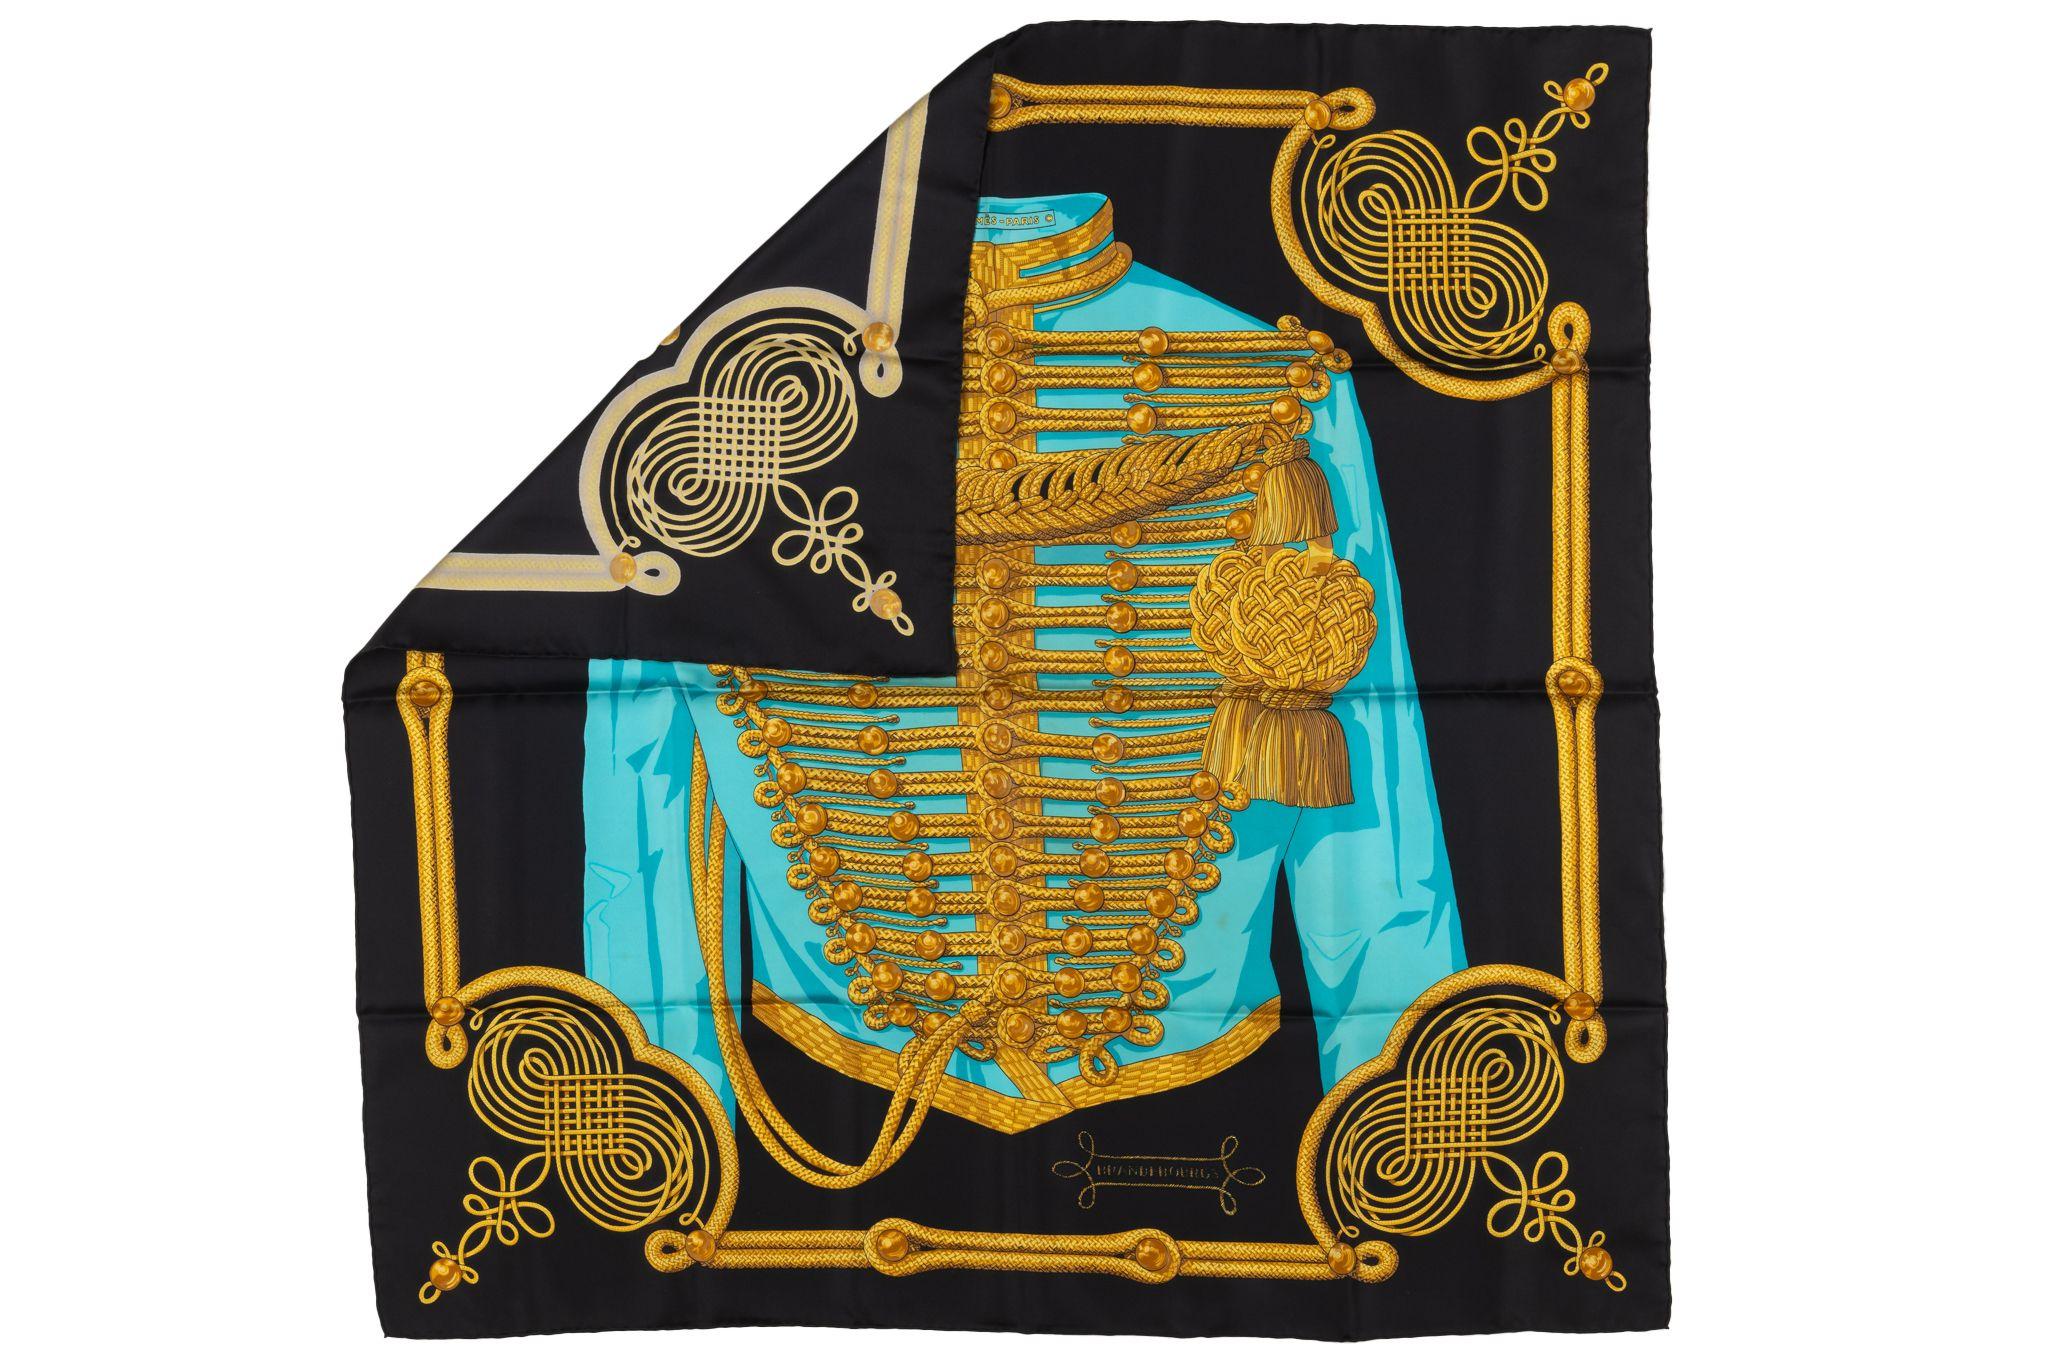 Hermes Brandebourgs Scarf, 100% silk with rolled edges. Rare black and turquoise color combination. Please note little spots, please refer to photo.